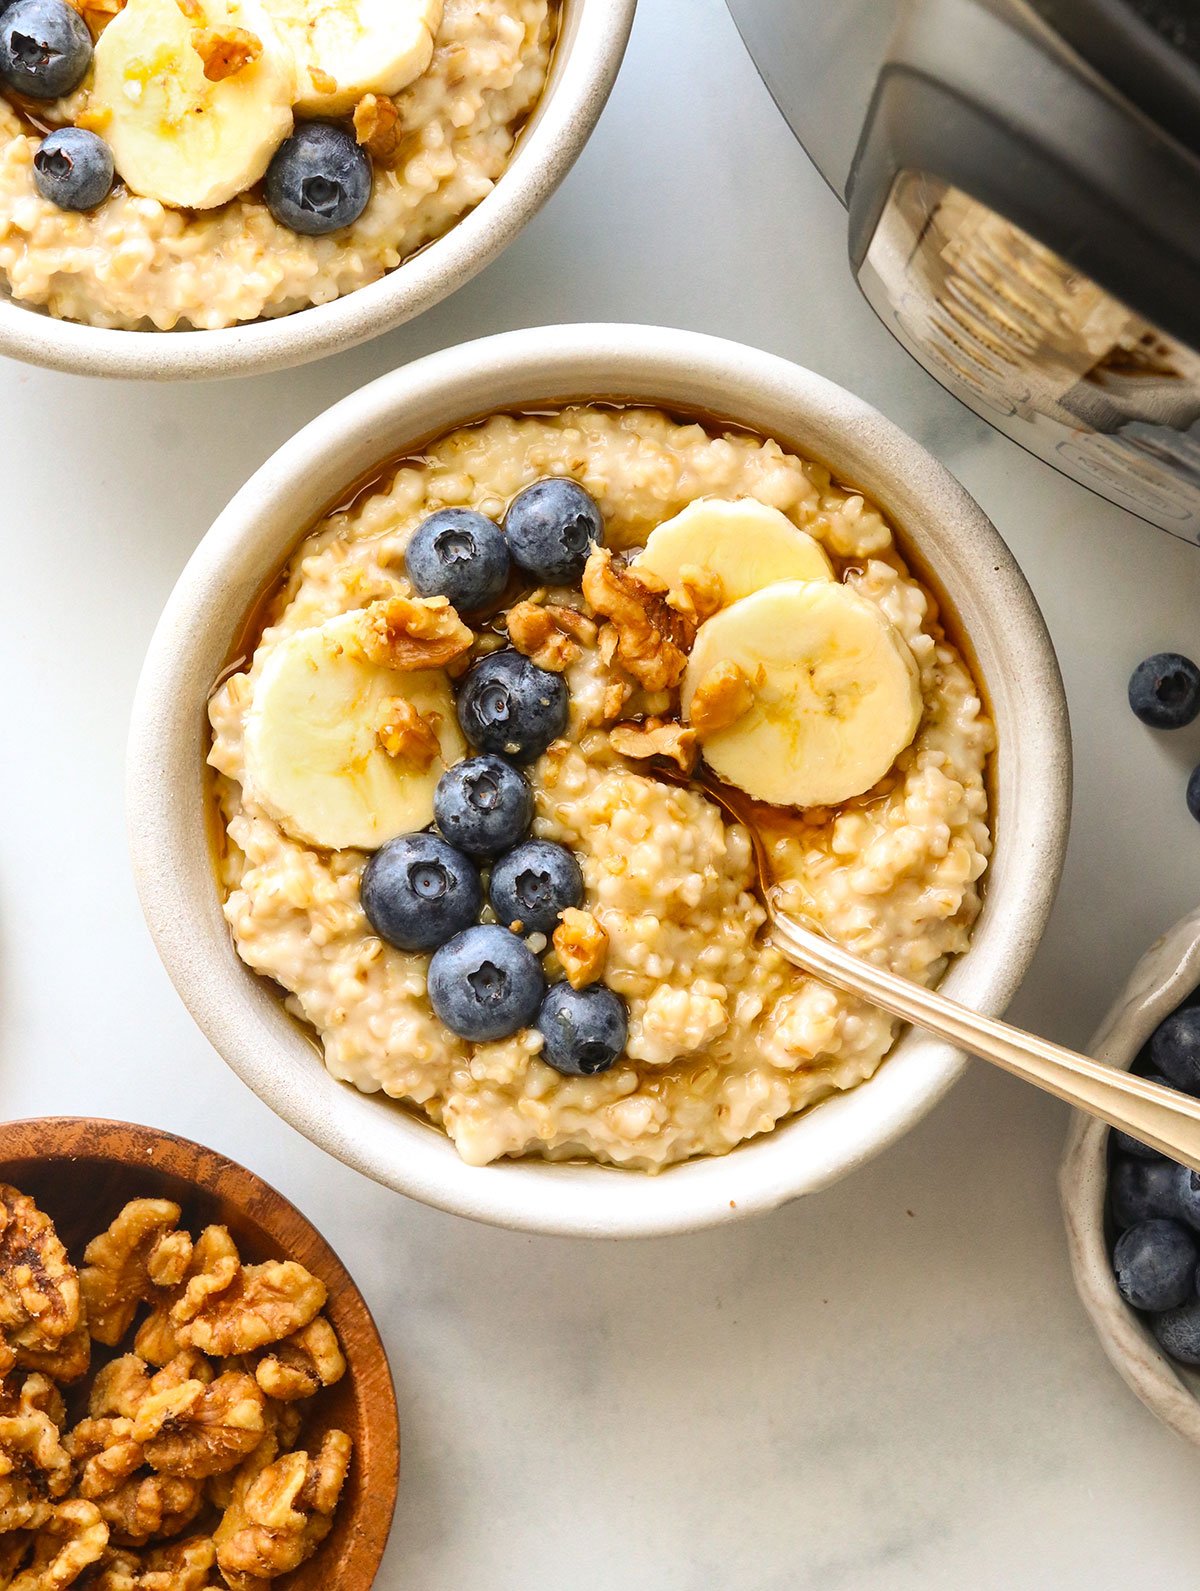 Instant pot steel cut oats served with blueberries and sliced banana.